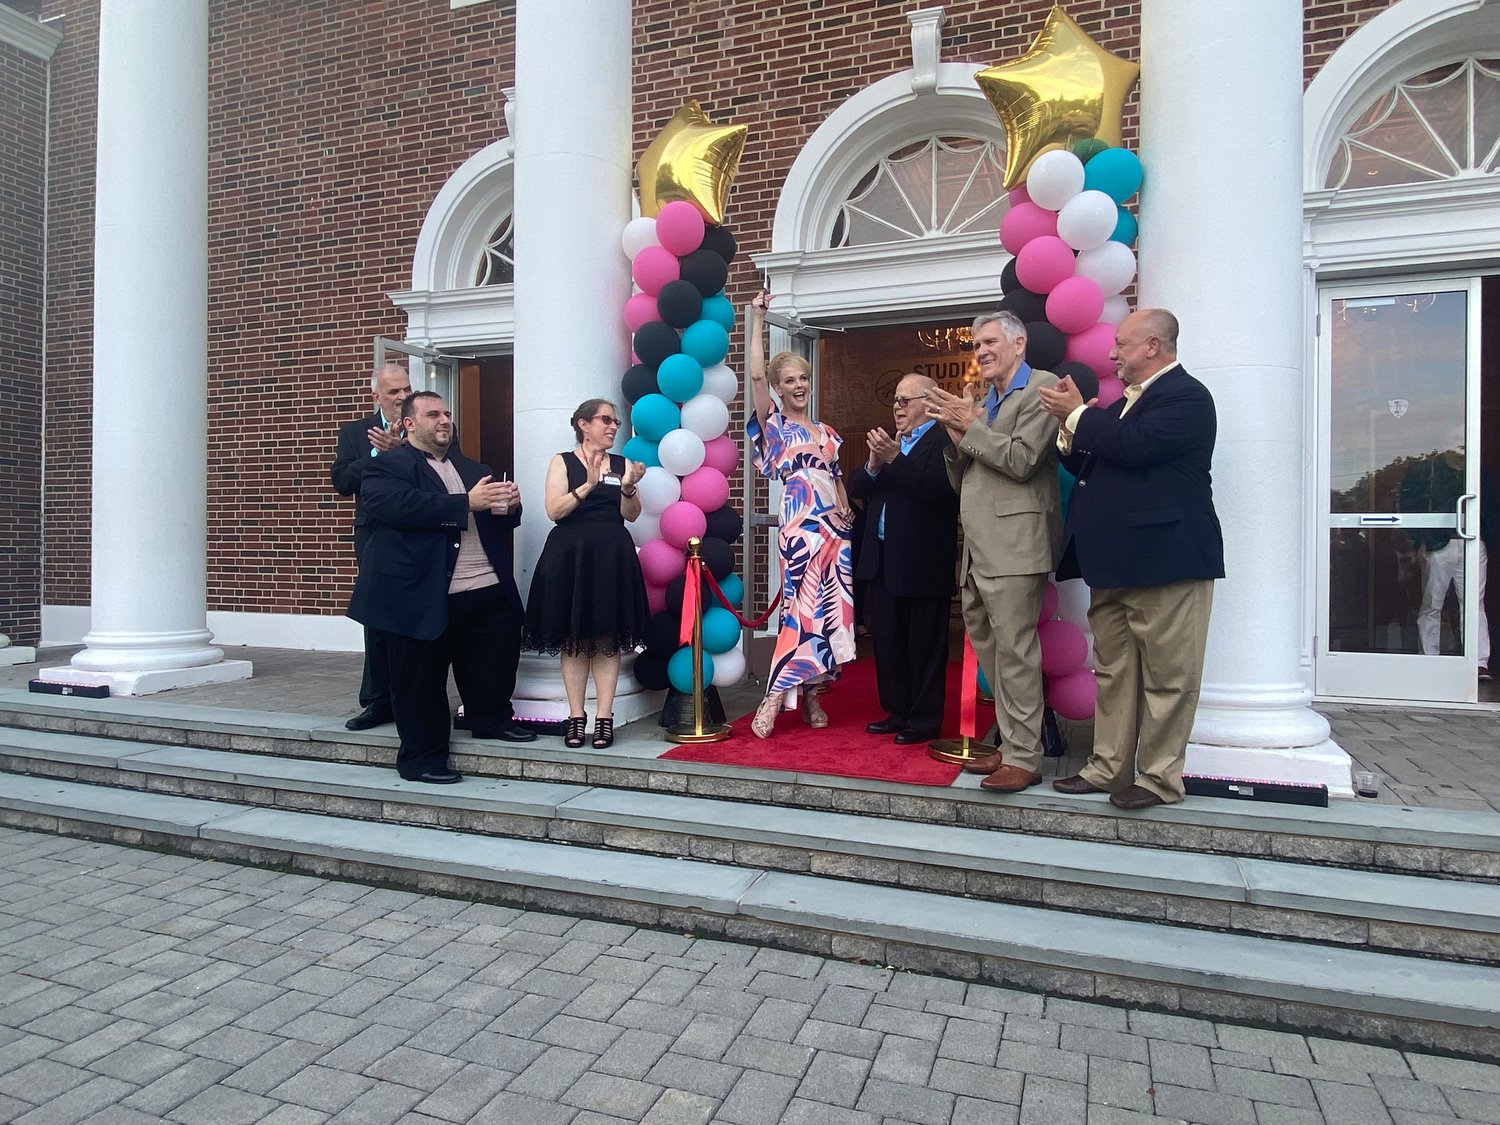 From left to right: Executive artistic director David Dubin, executive director Chris Rosselli, director of educational theatre Tiana Christoforidis, actress Angie Schworer, executive artistic director Rick Grossman, executive project manager Rick Hachemeister and managing director Michael Blangiforti cut the grand-opening ribbon.